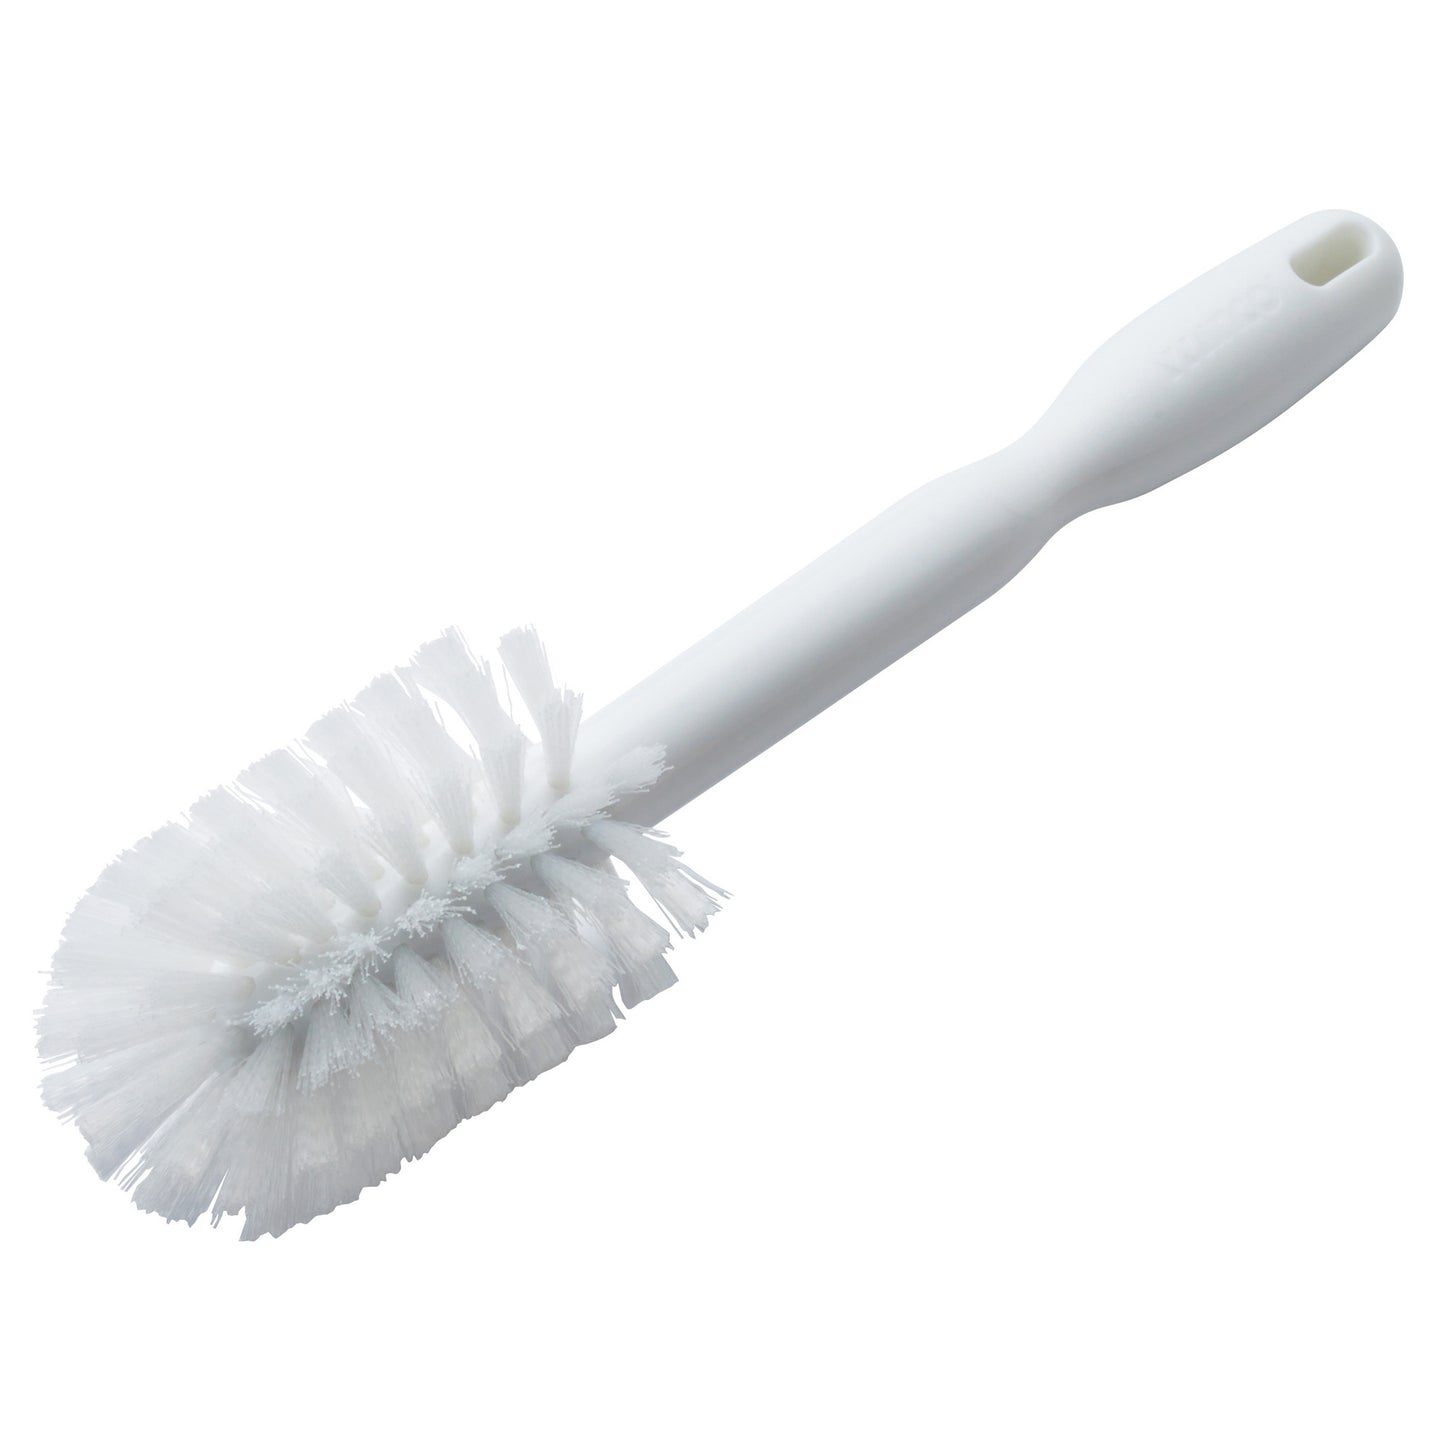 BRB-12 - Bottle Cleaning Brush